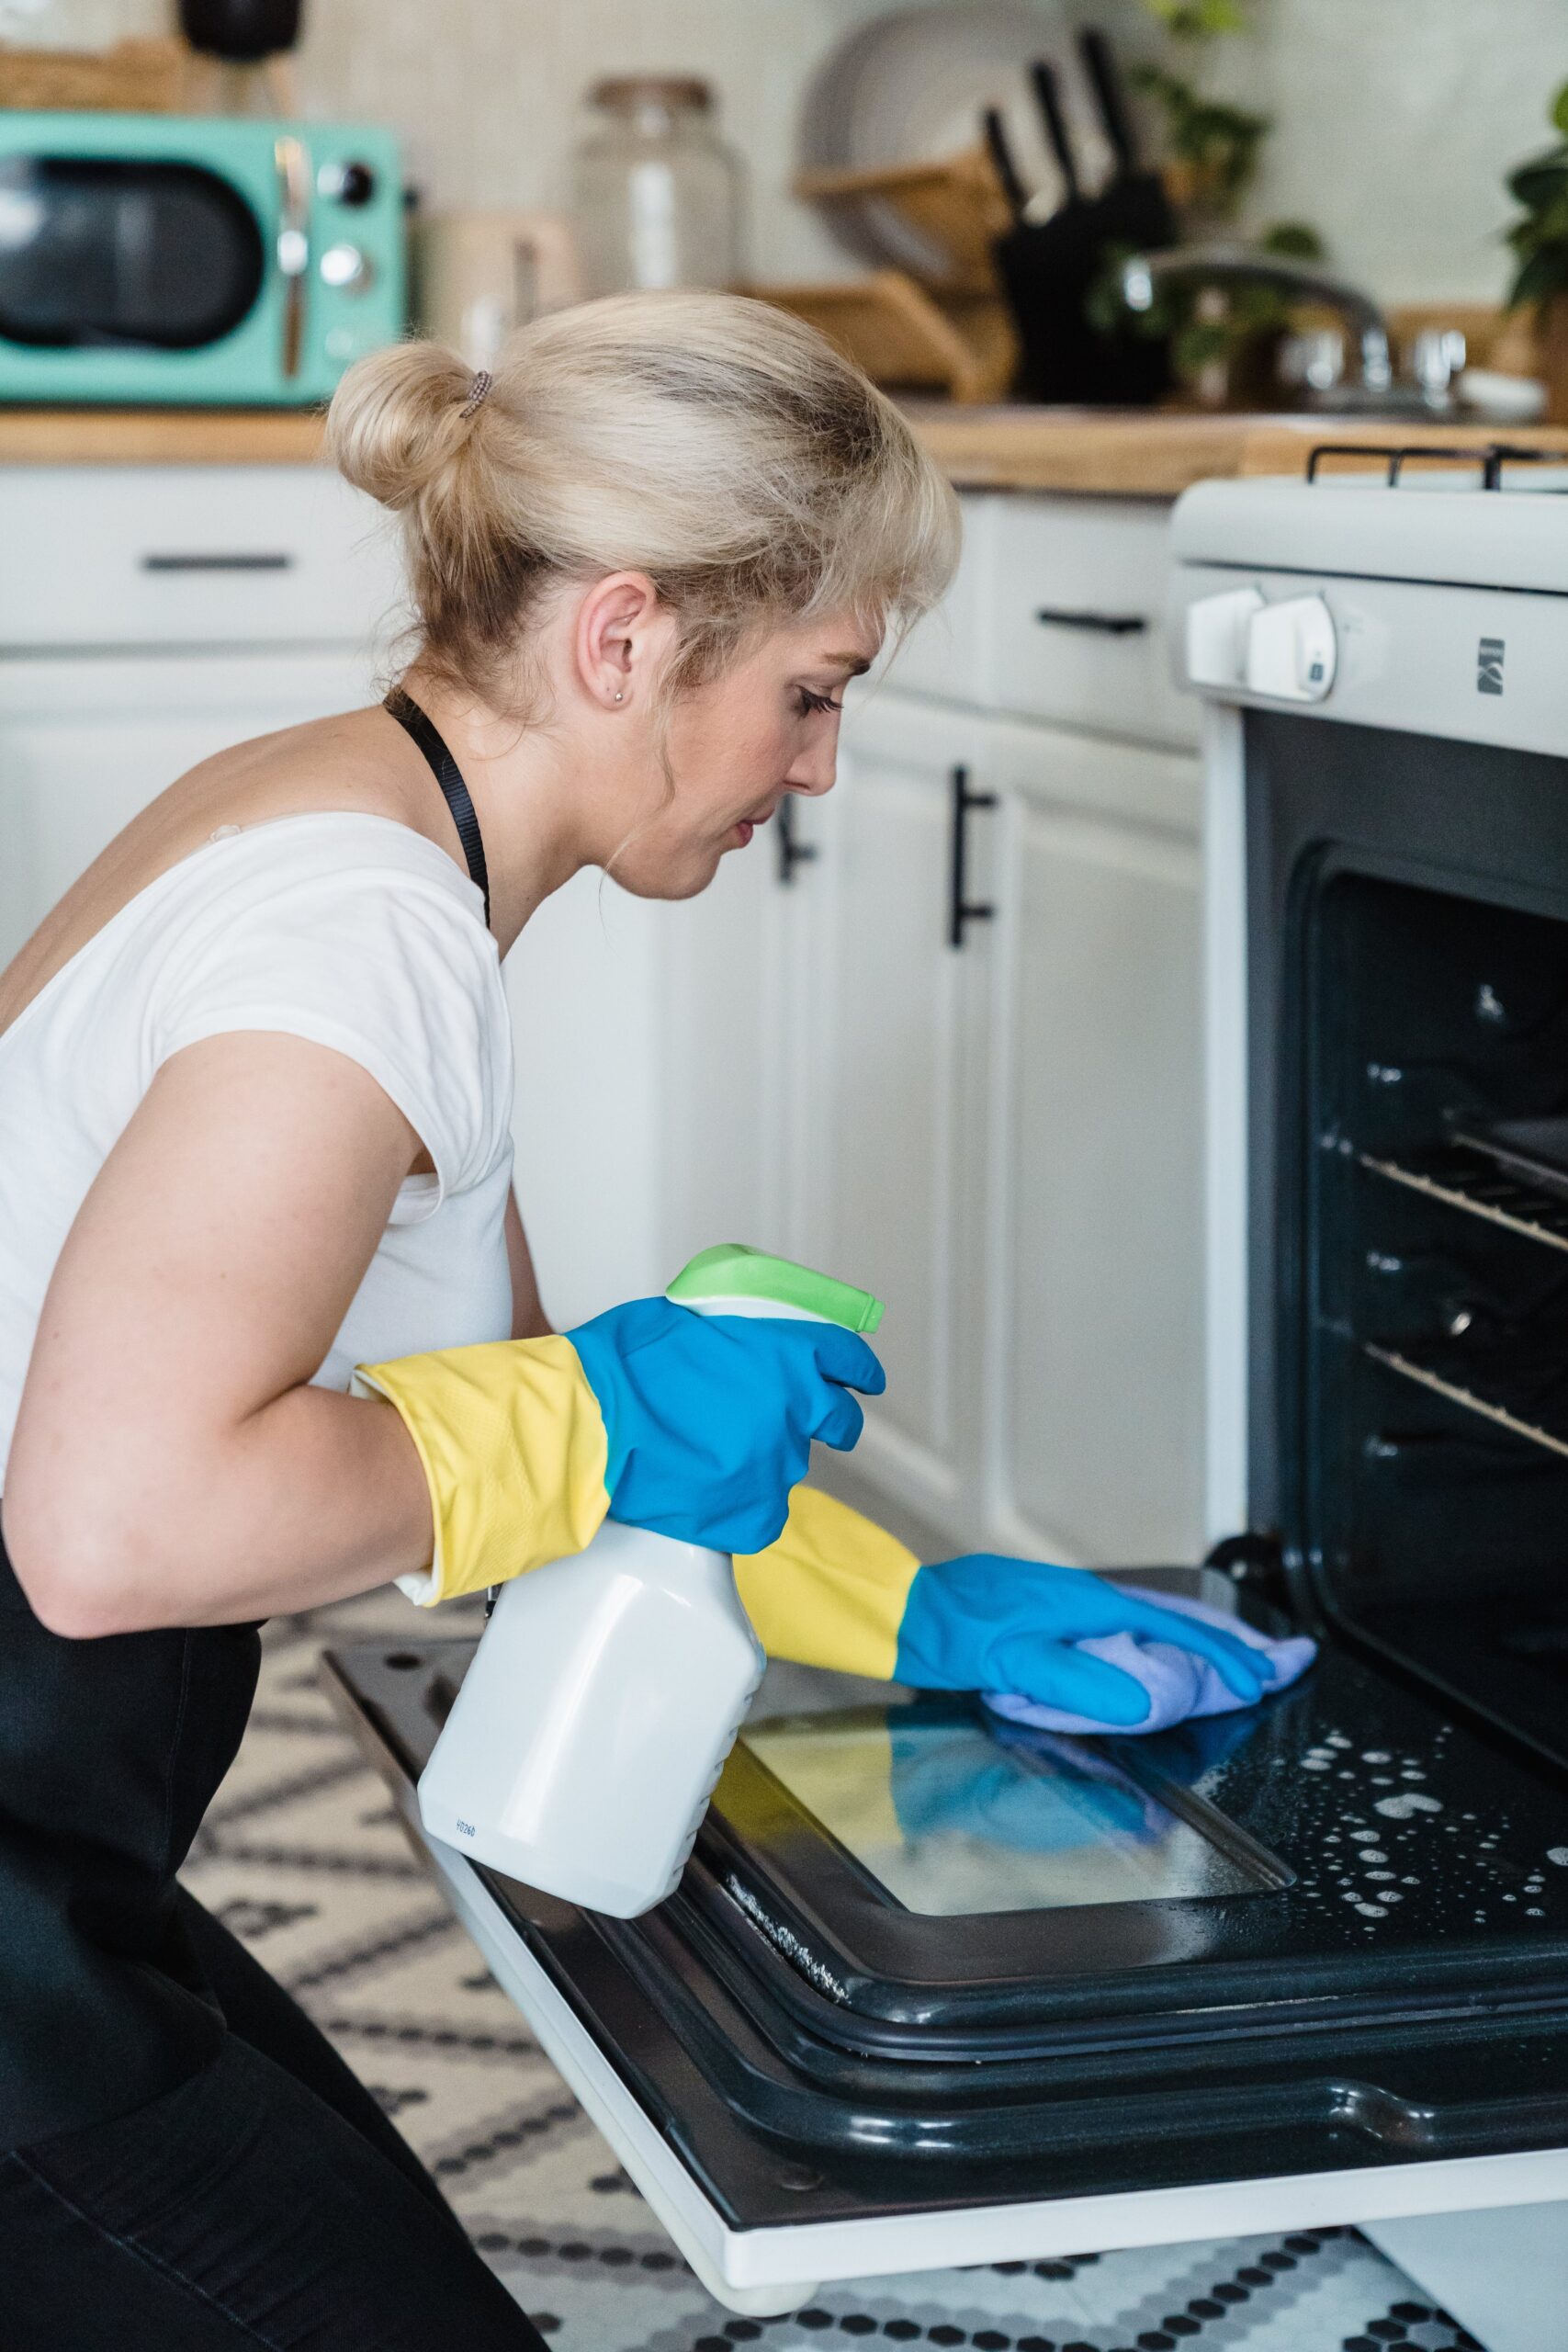 woman in white shirt holding white and green plastic spray bottle cleaning the oven